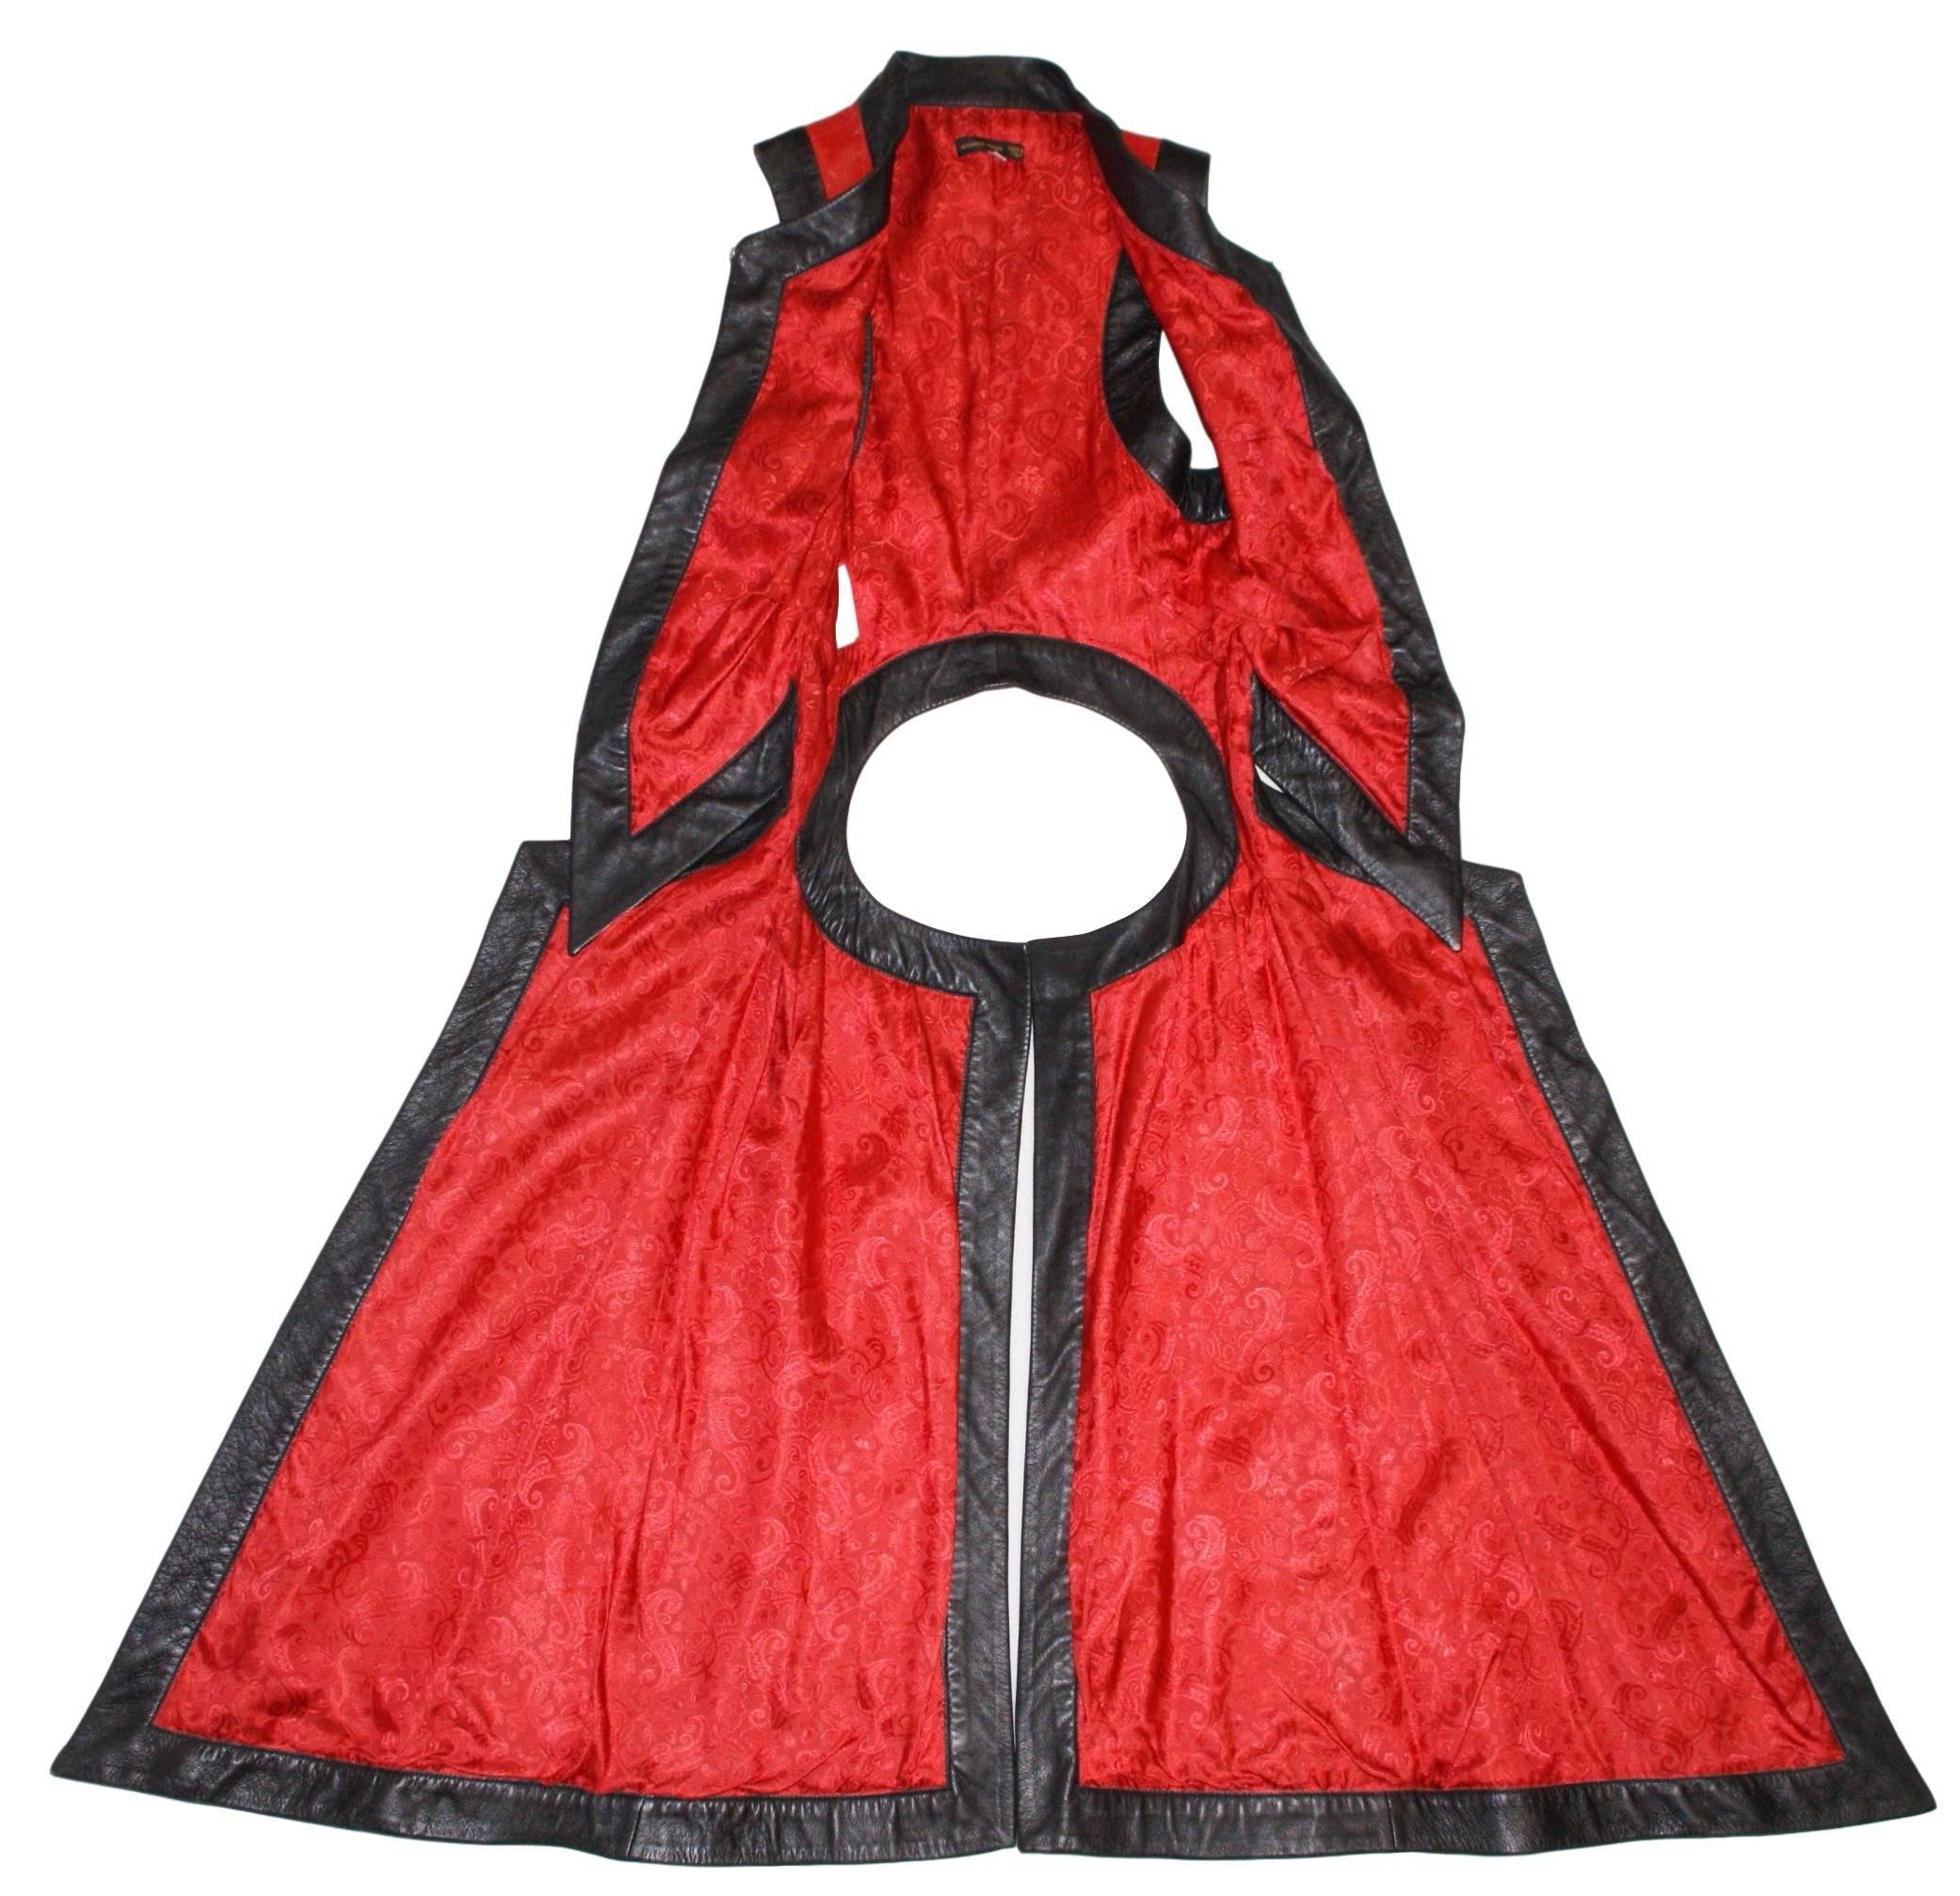 S/S 2000 Alexander McQueen Runway Dominatrix Leather Cut-Out Vest Jacket 38 In Excellent Condition In Yukon, OK